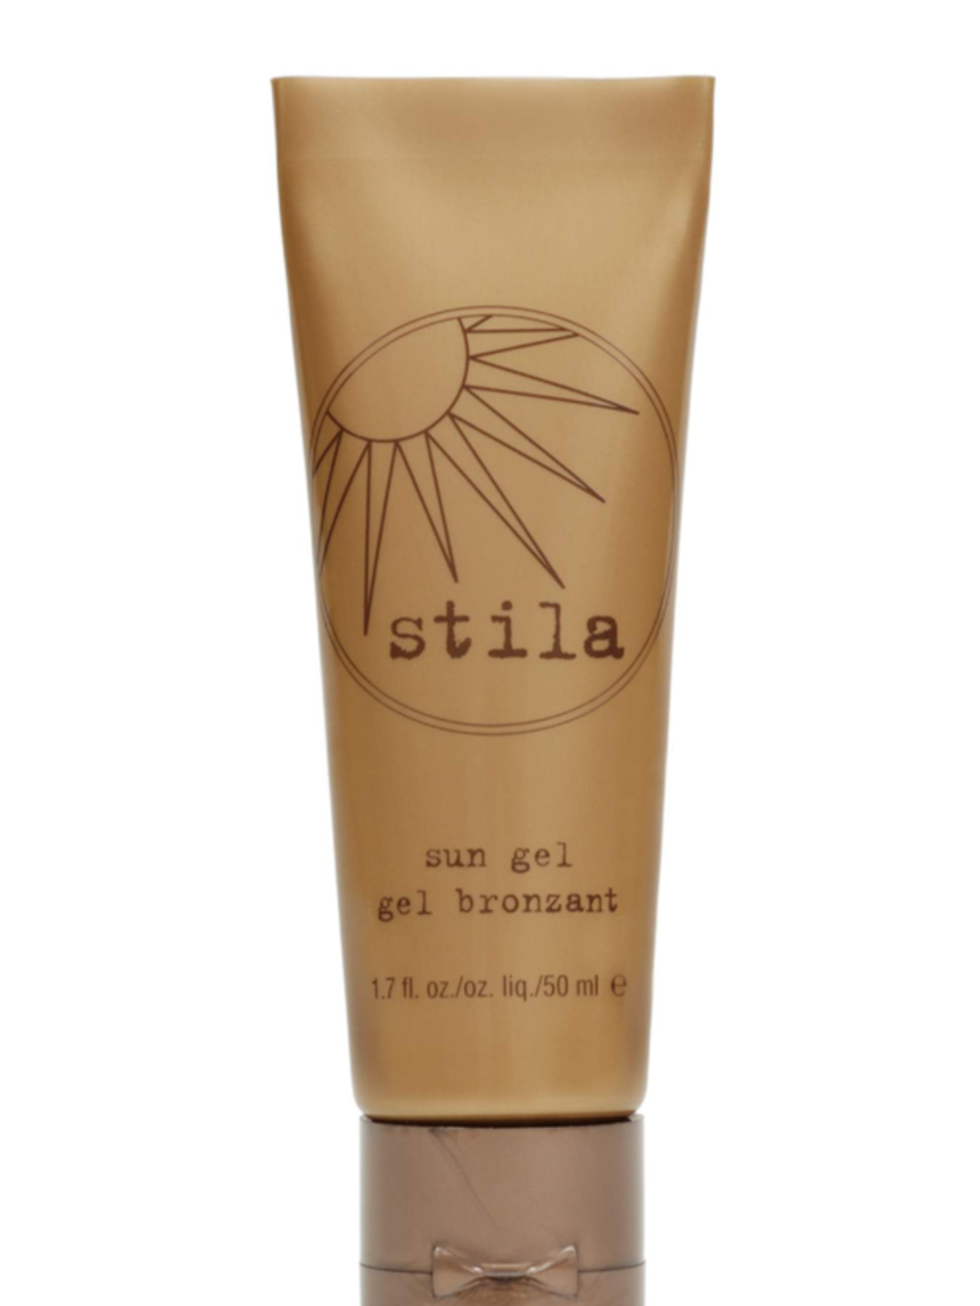 <p>Sun Gel Body, £18 by Stila at <a href="http://www.hqhair.com/code/products.asp?PageID=906&amp;SectionID=1831&amp;FeaturedID=16086&amp;FeaturedProduct=10694&amp;pID=1&amp;cID=1">HQhair</a></p><p>Kate applies this light body gel after the shower to keep 